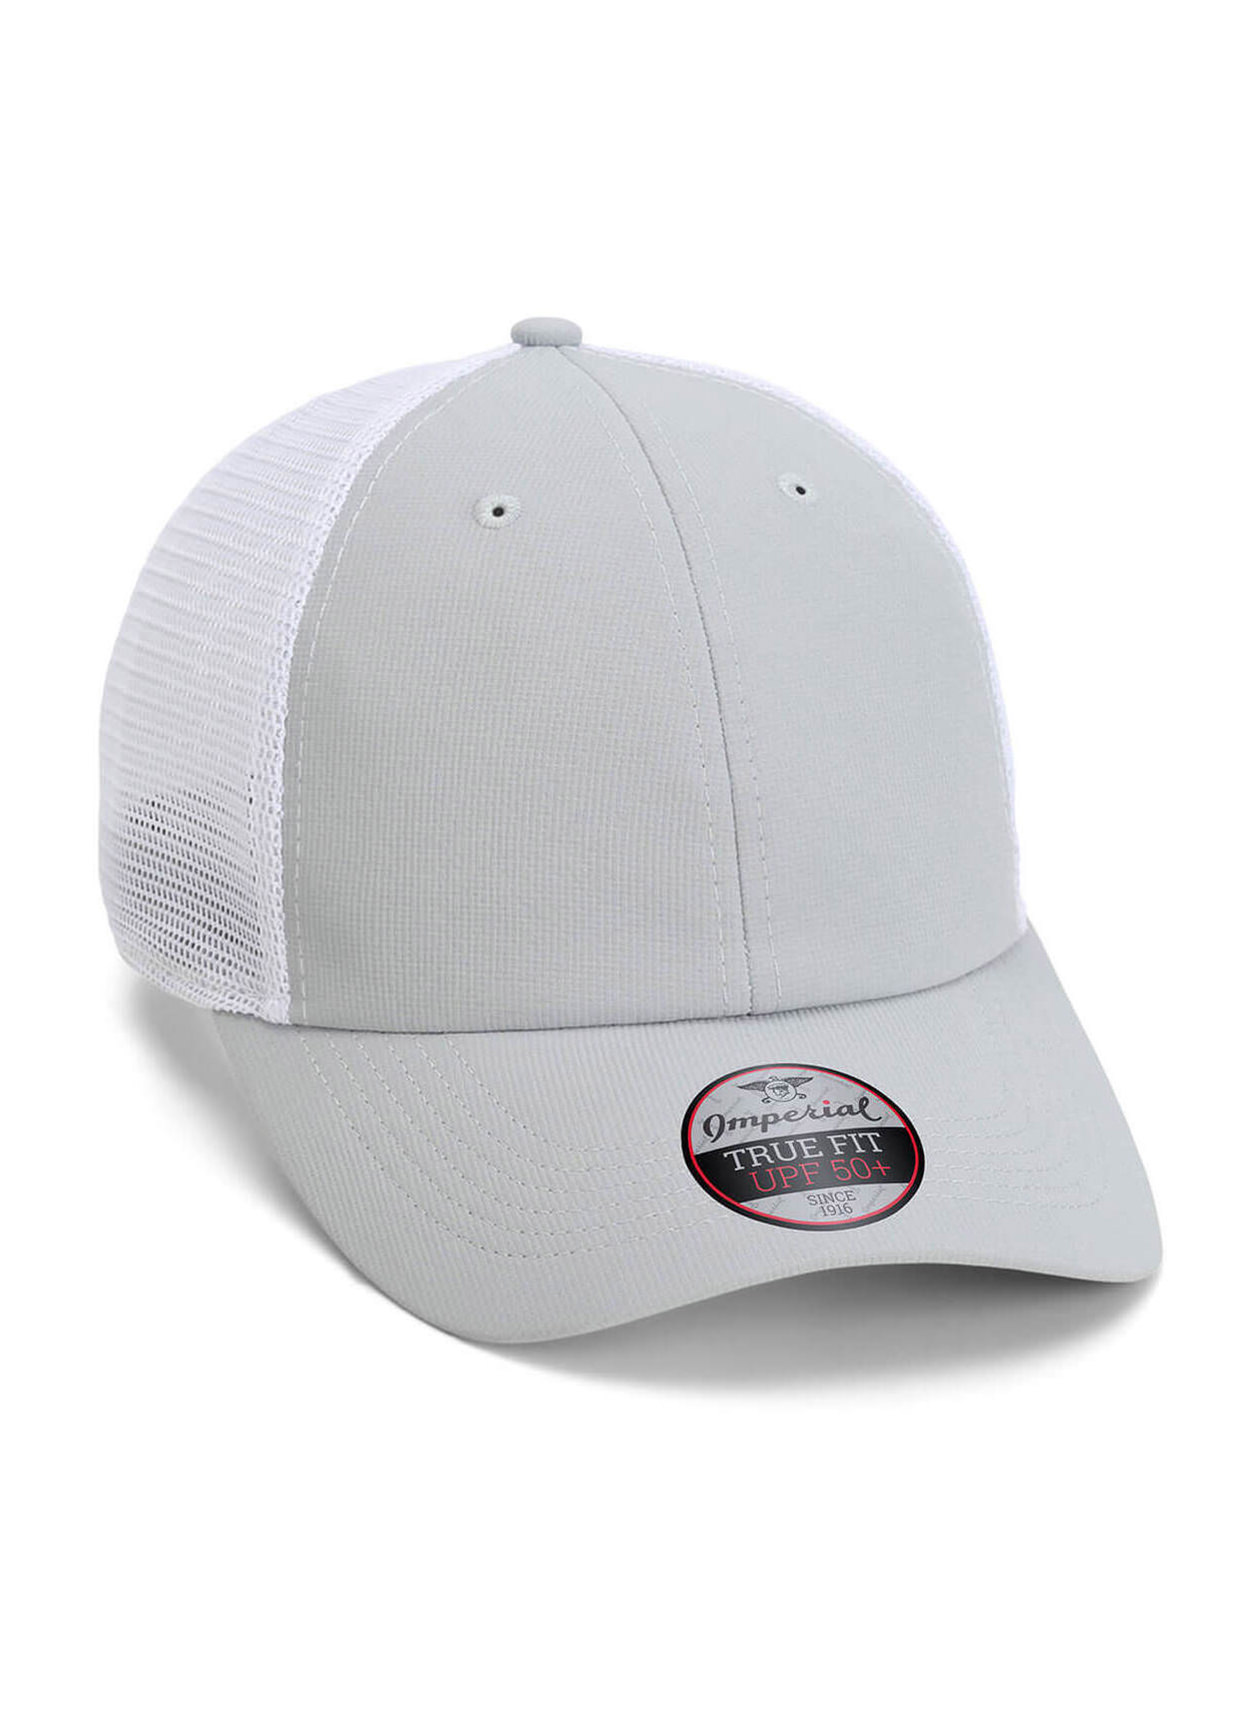 Imperial Fog / White Structured Performance Meshback Hat